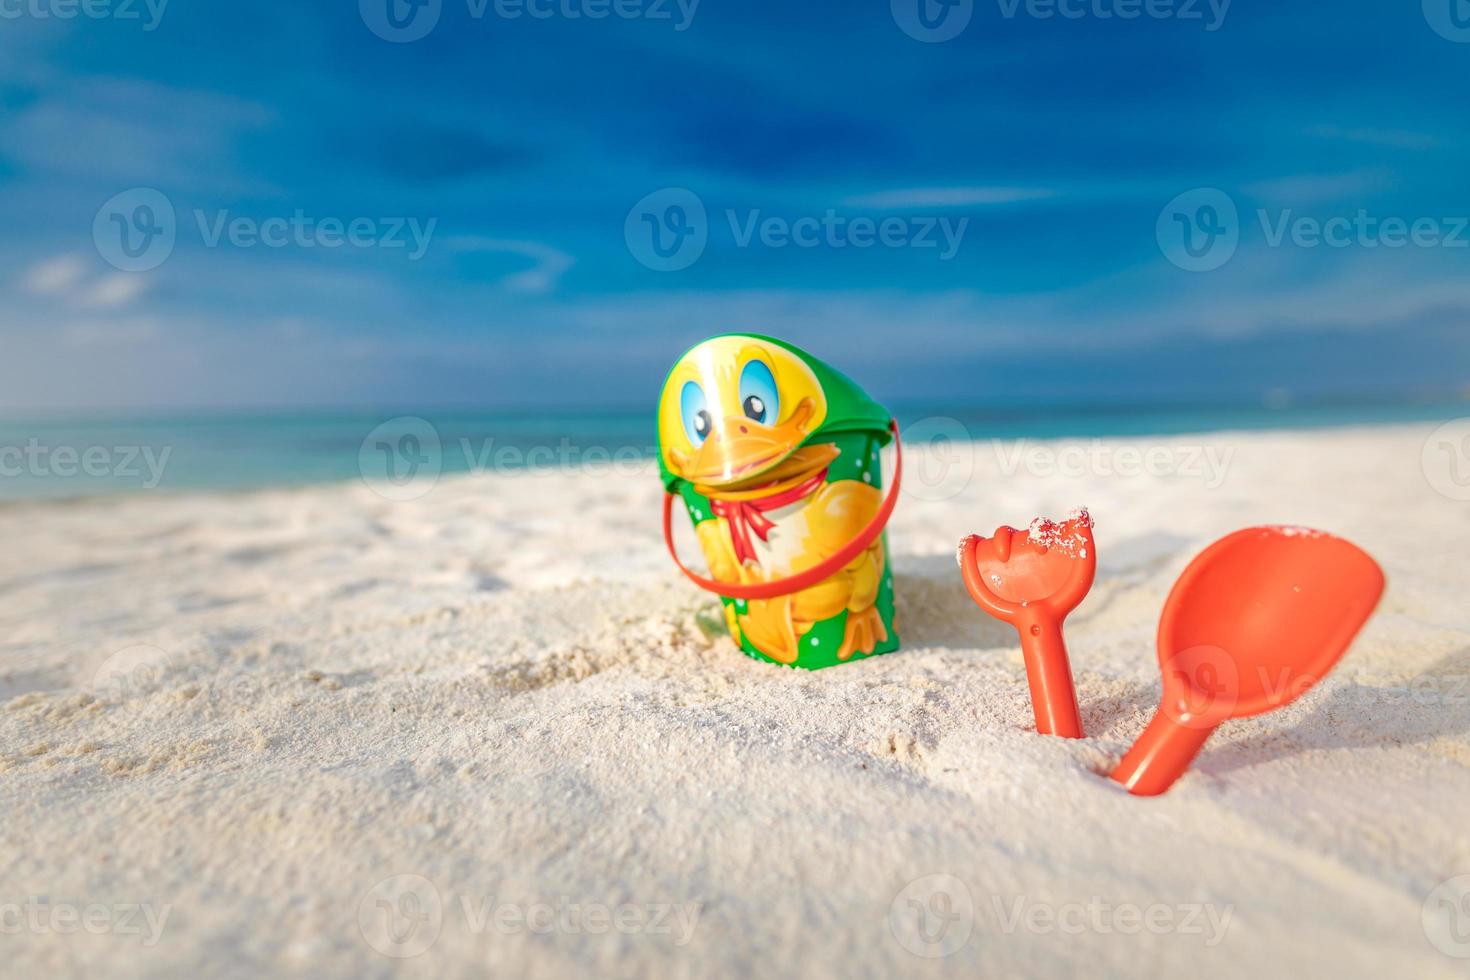 Children's beach toys - buckets, spade and shovel on sand on a sunny day. Topical island beach holiday, tourism background. Cute beach toys photo